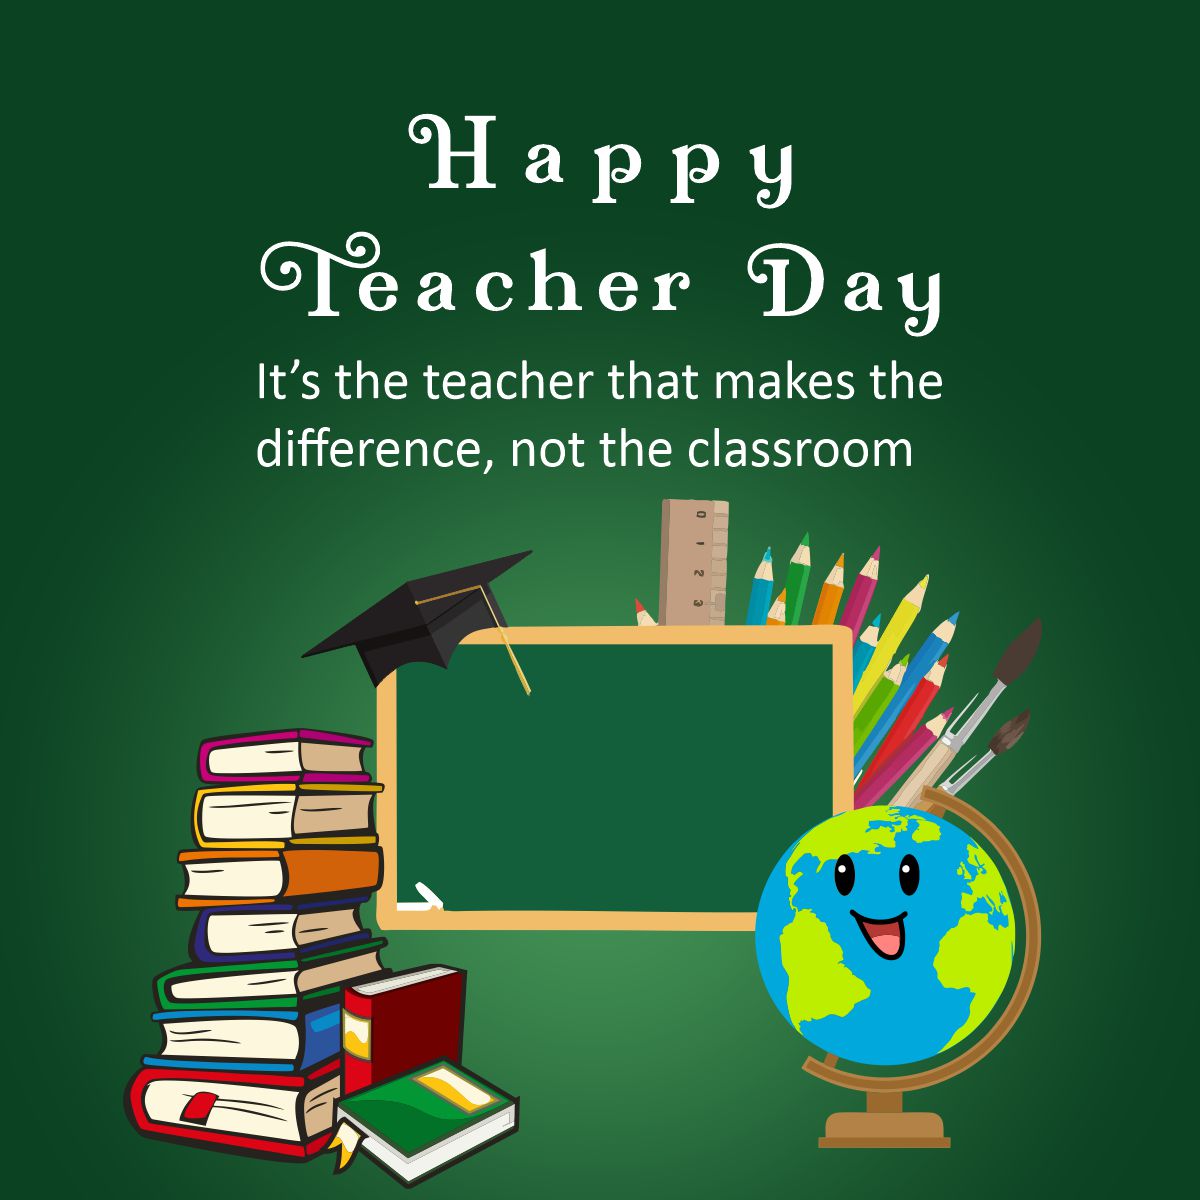 Download Happy Teacher day poster vector design download for free